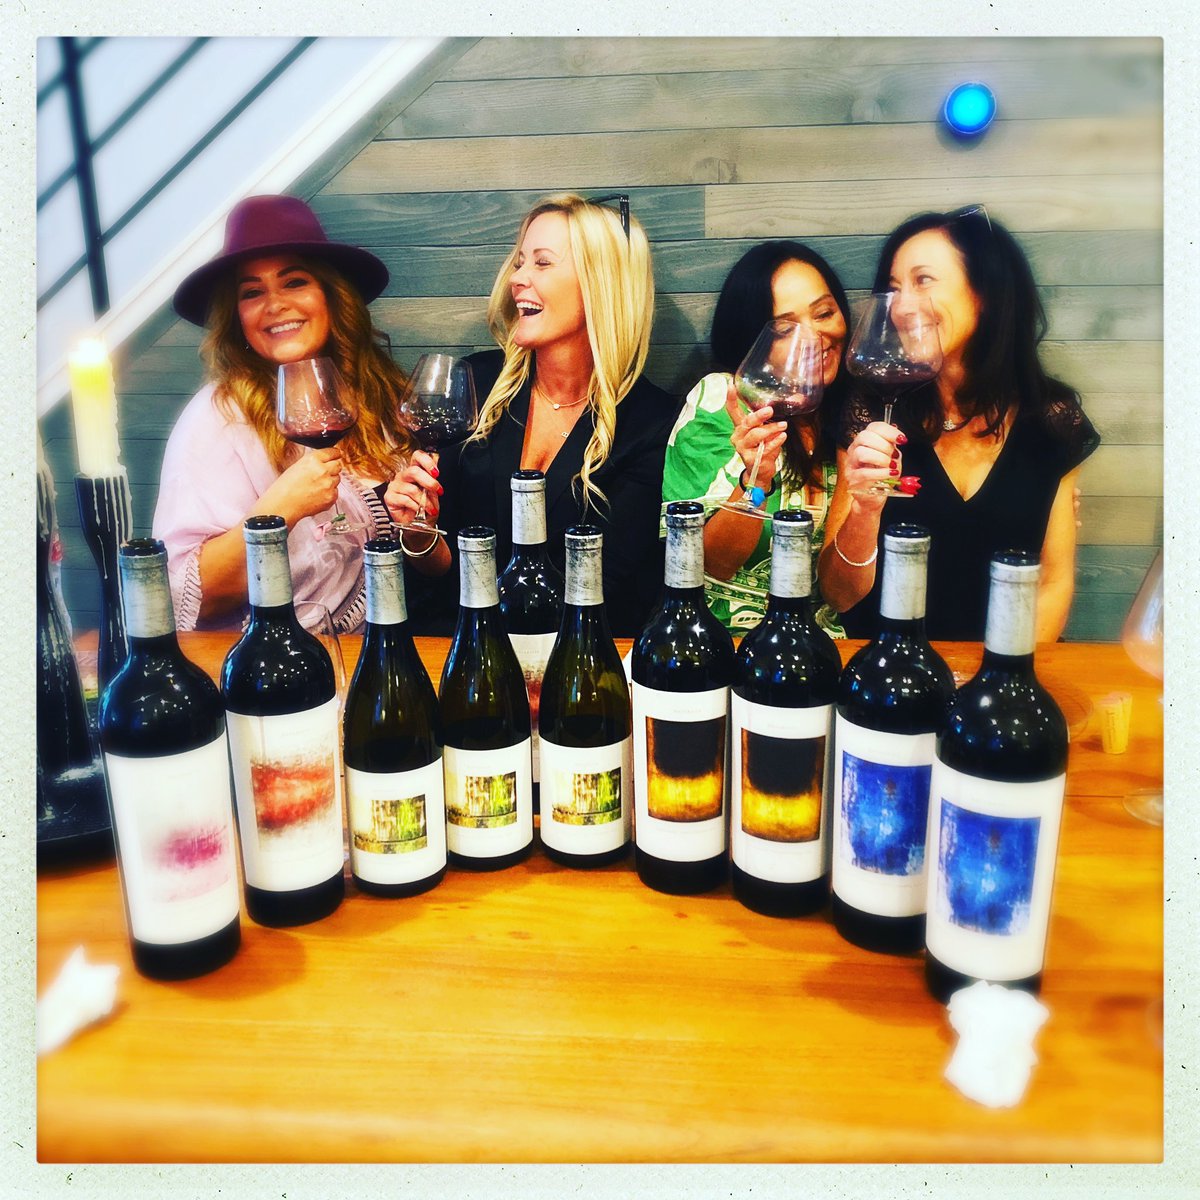 Park City… you did not disappoint !! The venue, the food and the people were over the top fabulous.

Thank you for your love for Russell Bevan and Adversity Cellars. #wine #winelovers #parkcity #winetime #thankyou #wineevent